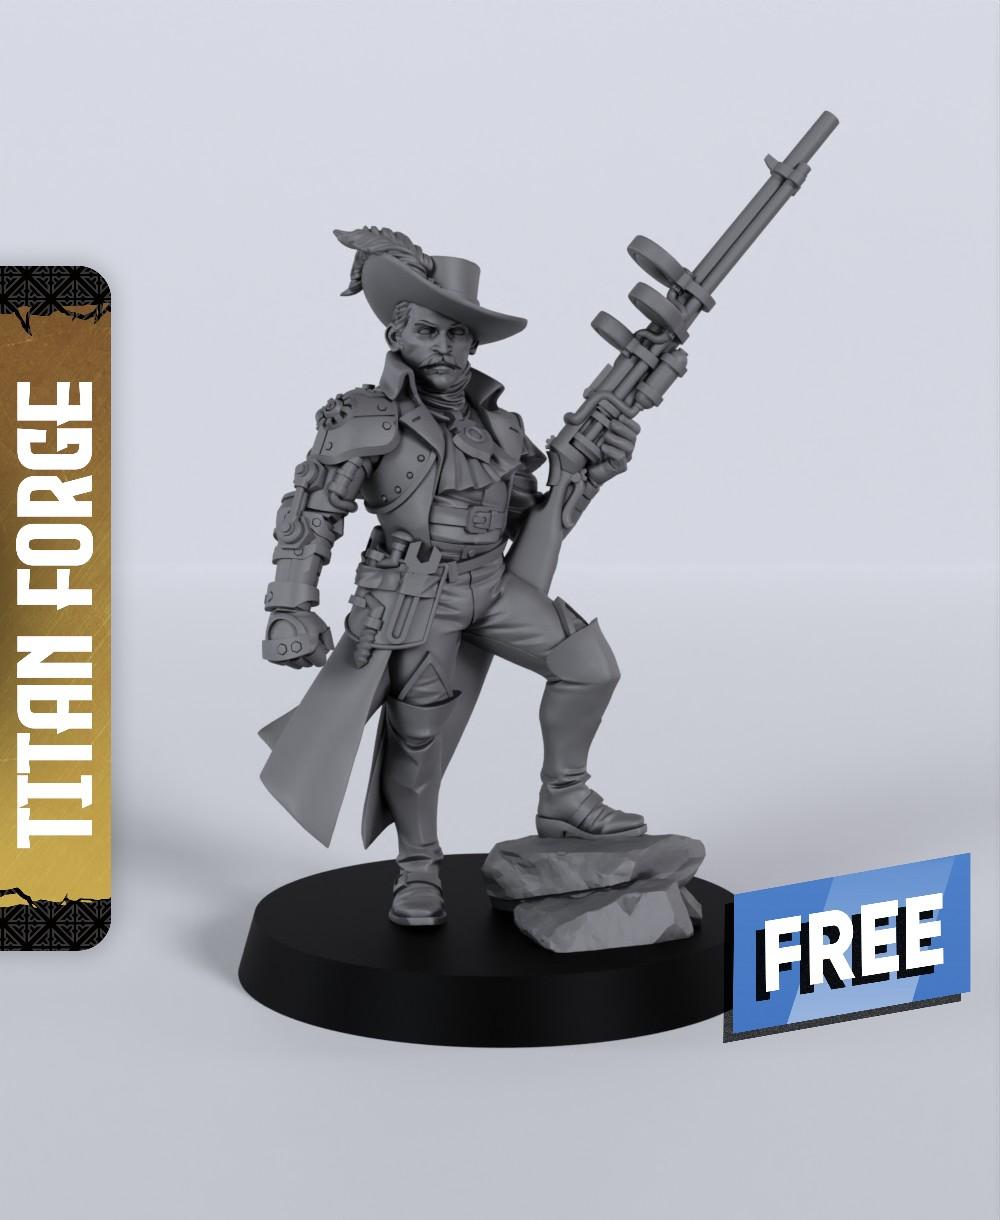 Sniper - With Free Dragon Warhammer - 5e DnD Inspired for RPG and Wargamers 3d model